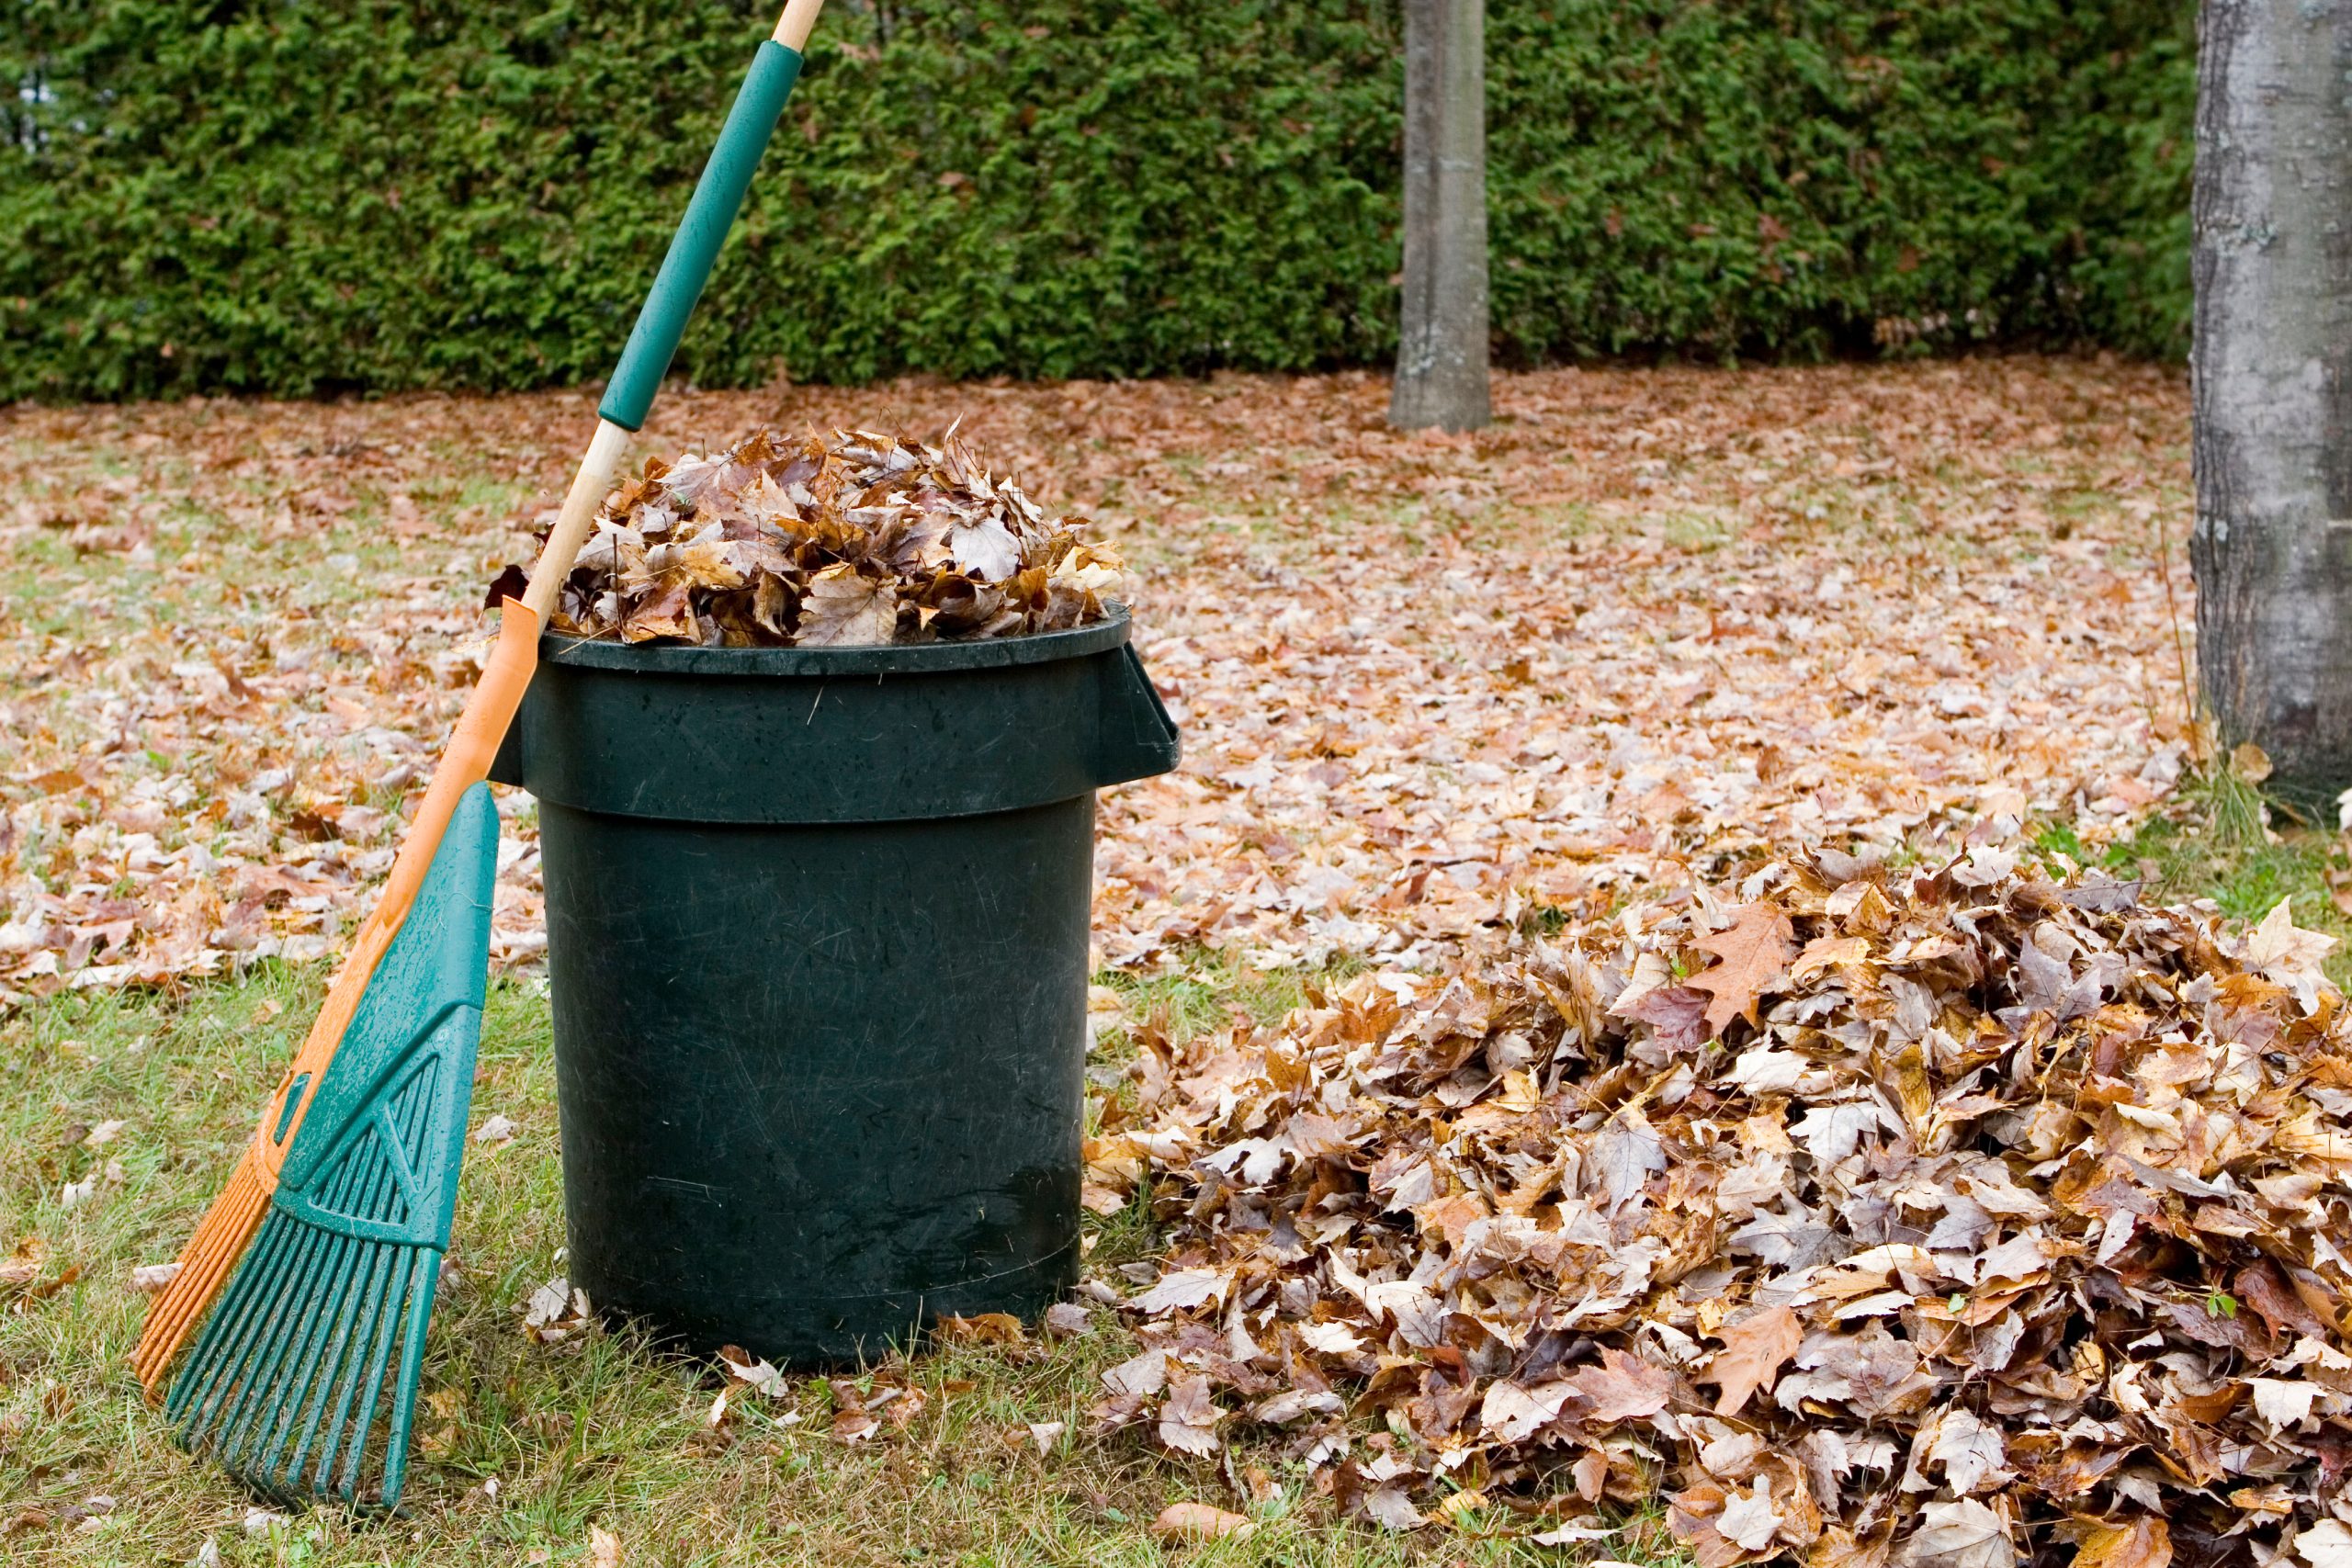 Trash can full of leaves to include a leaf rake in a yard full of leaves boarded by mature tree shrubrey